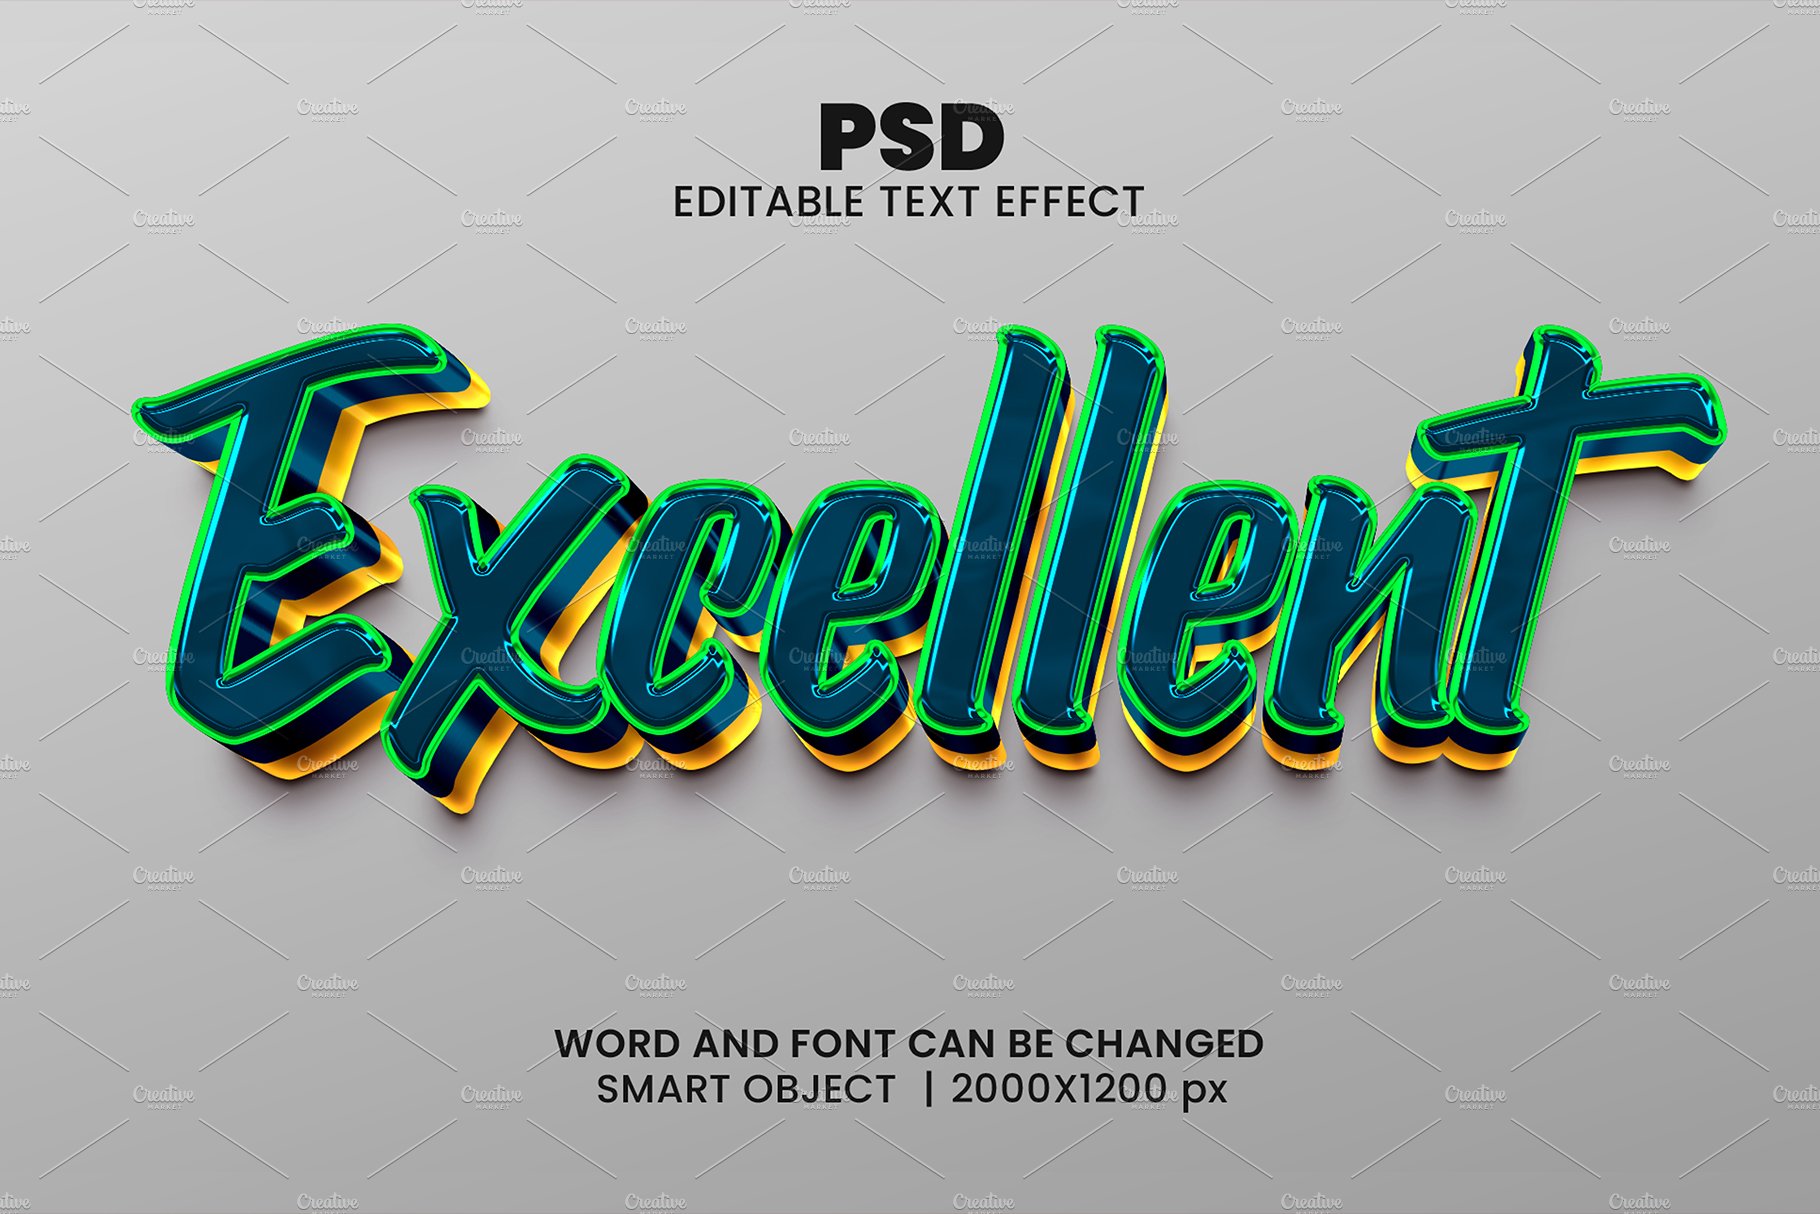 Excelent Editable Psd Text Effectcover image.